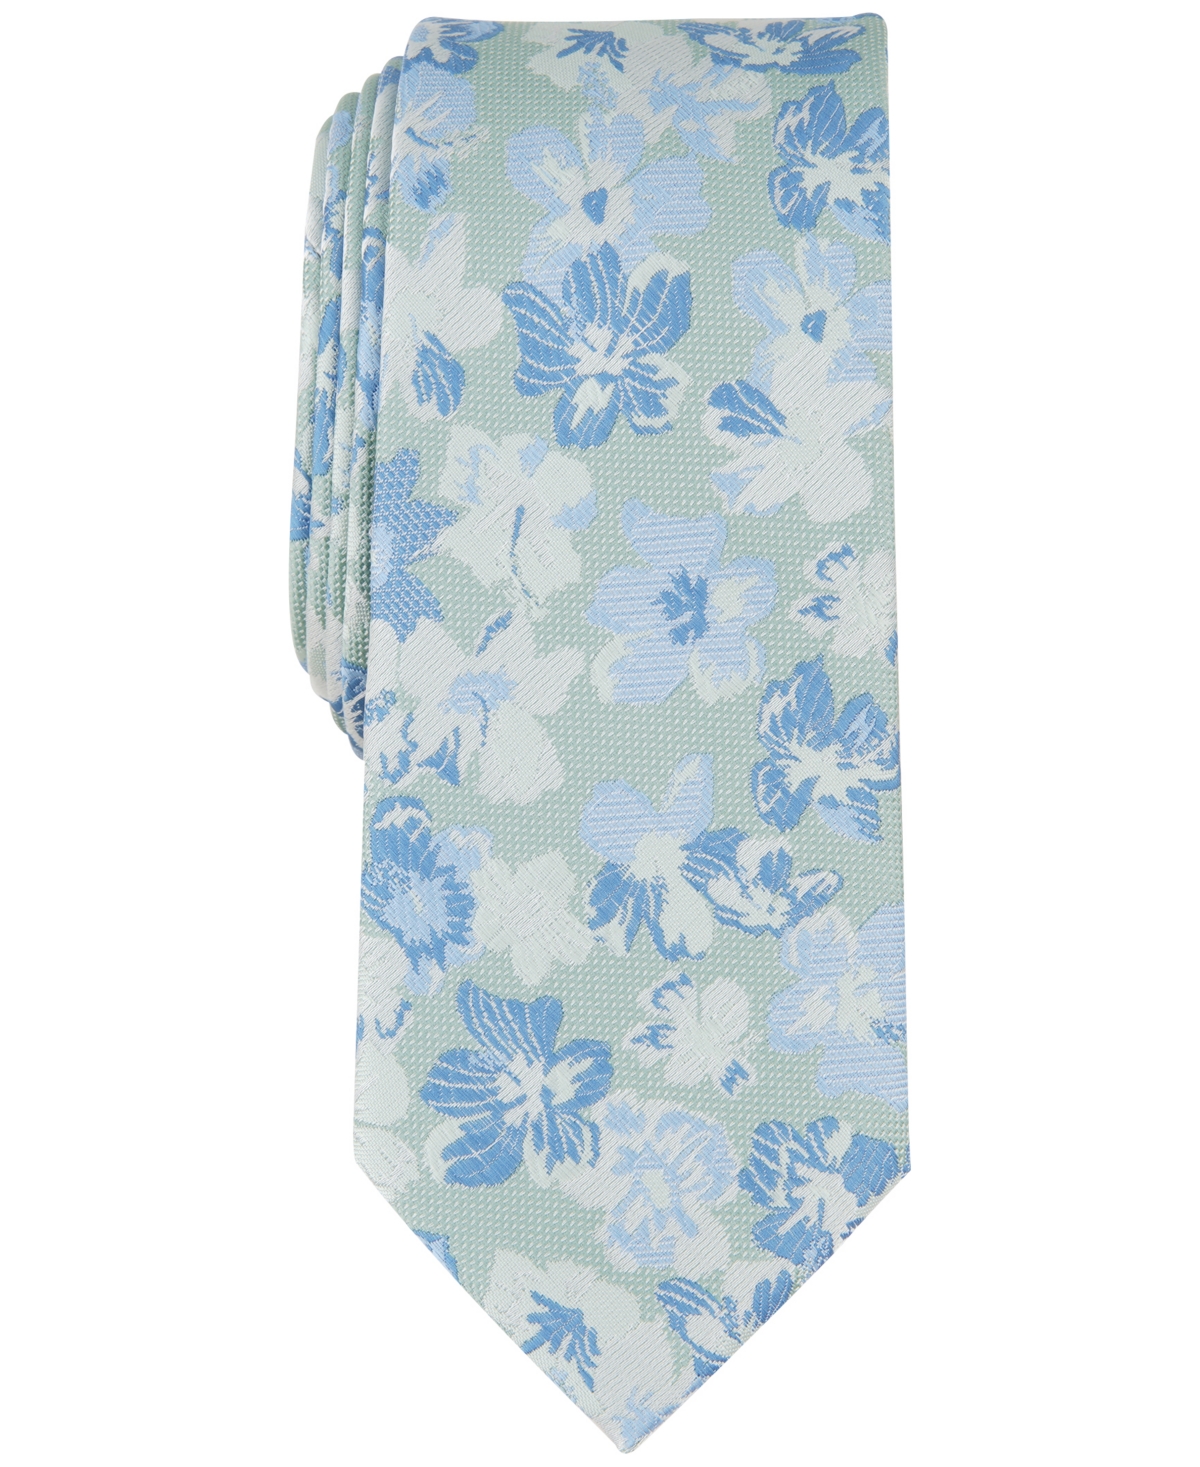 Men's Rhodes Floral Tie, Created for Macy's - Mint